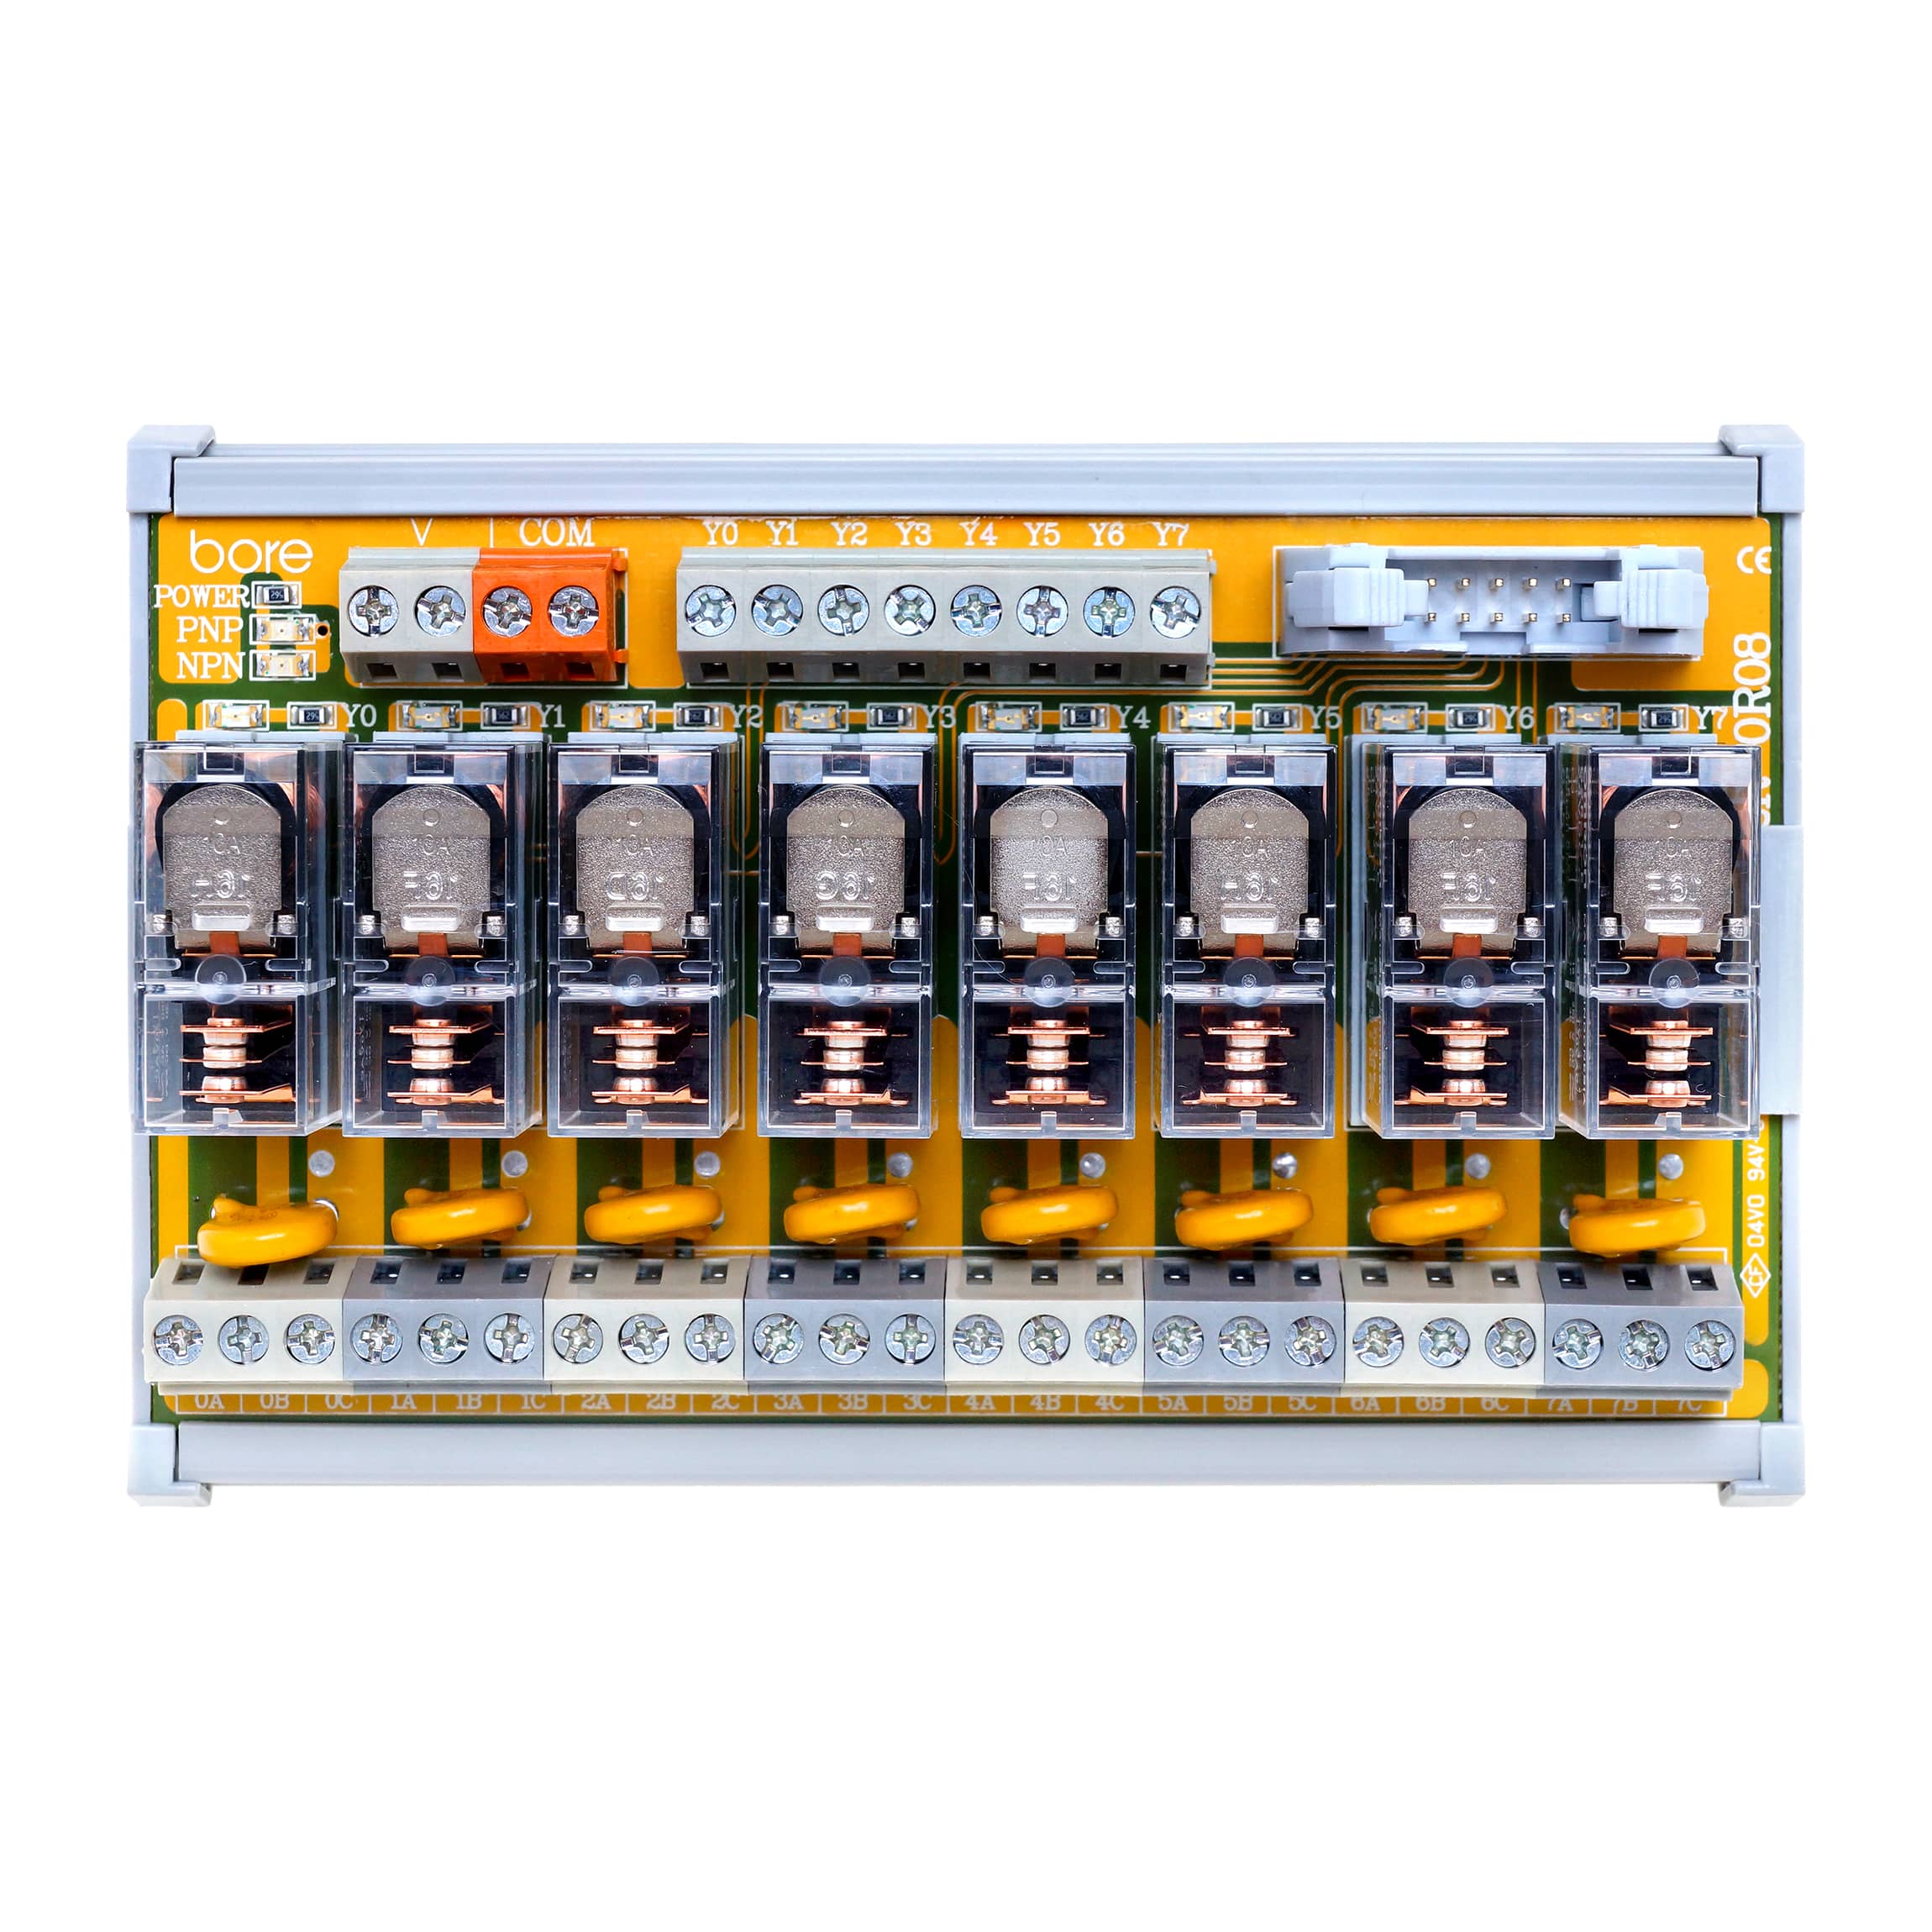 Products|Relay Module G2R-OR08-SP